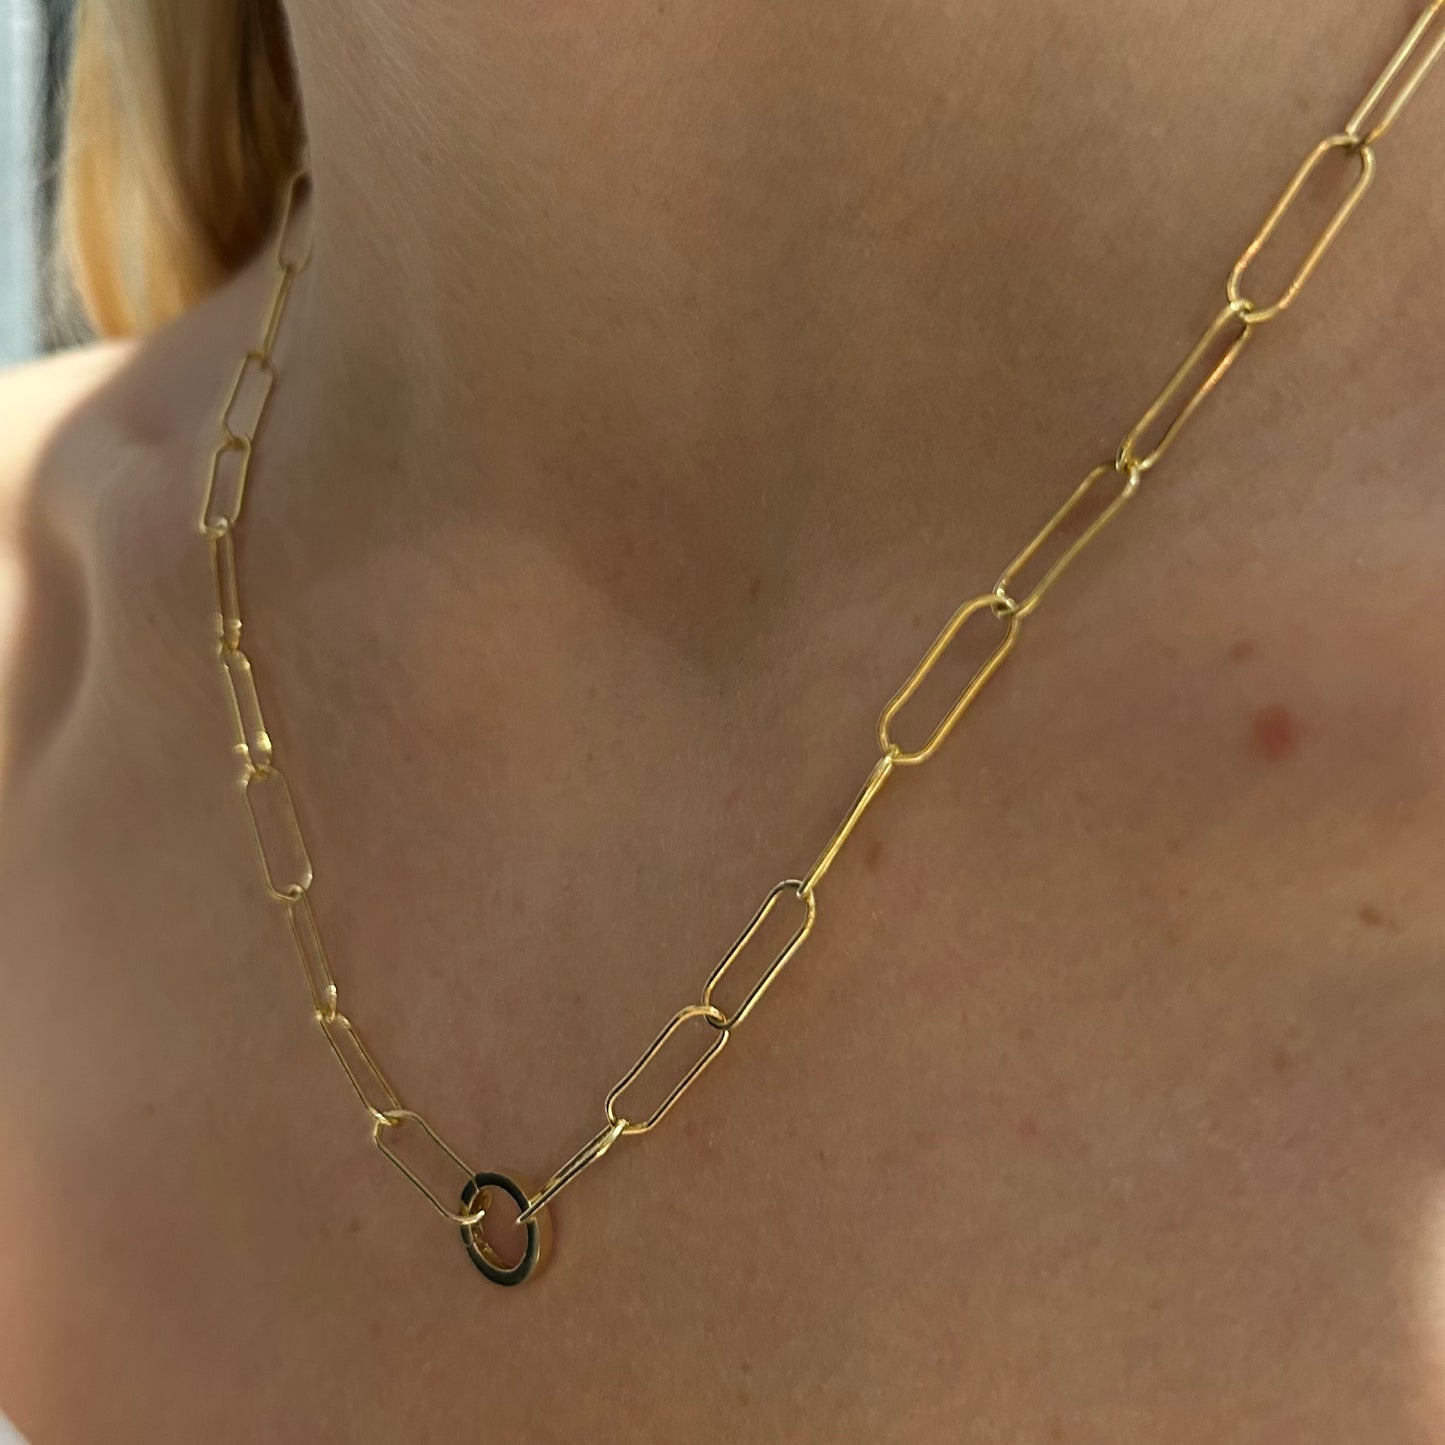 Smooth paper clip chain necklace 14k gold filled  with 14k gold shortener clasp.